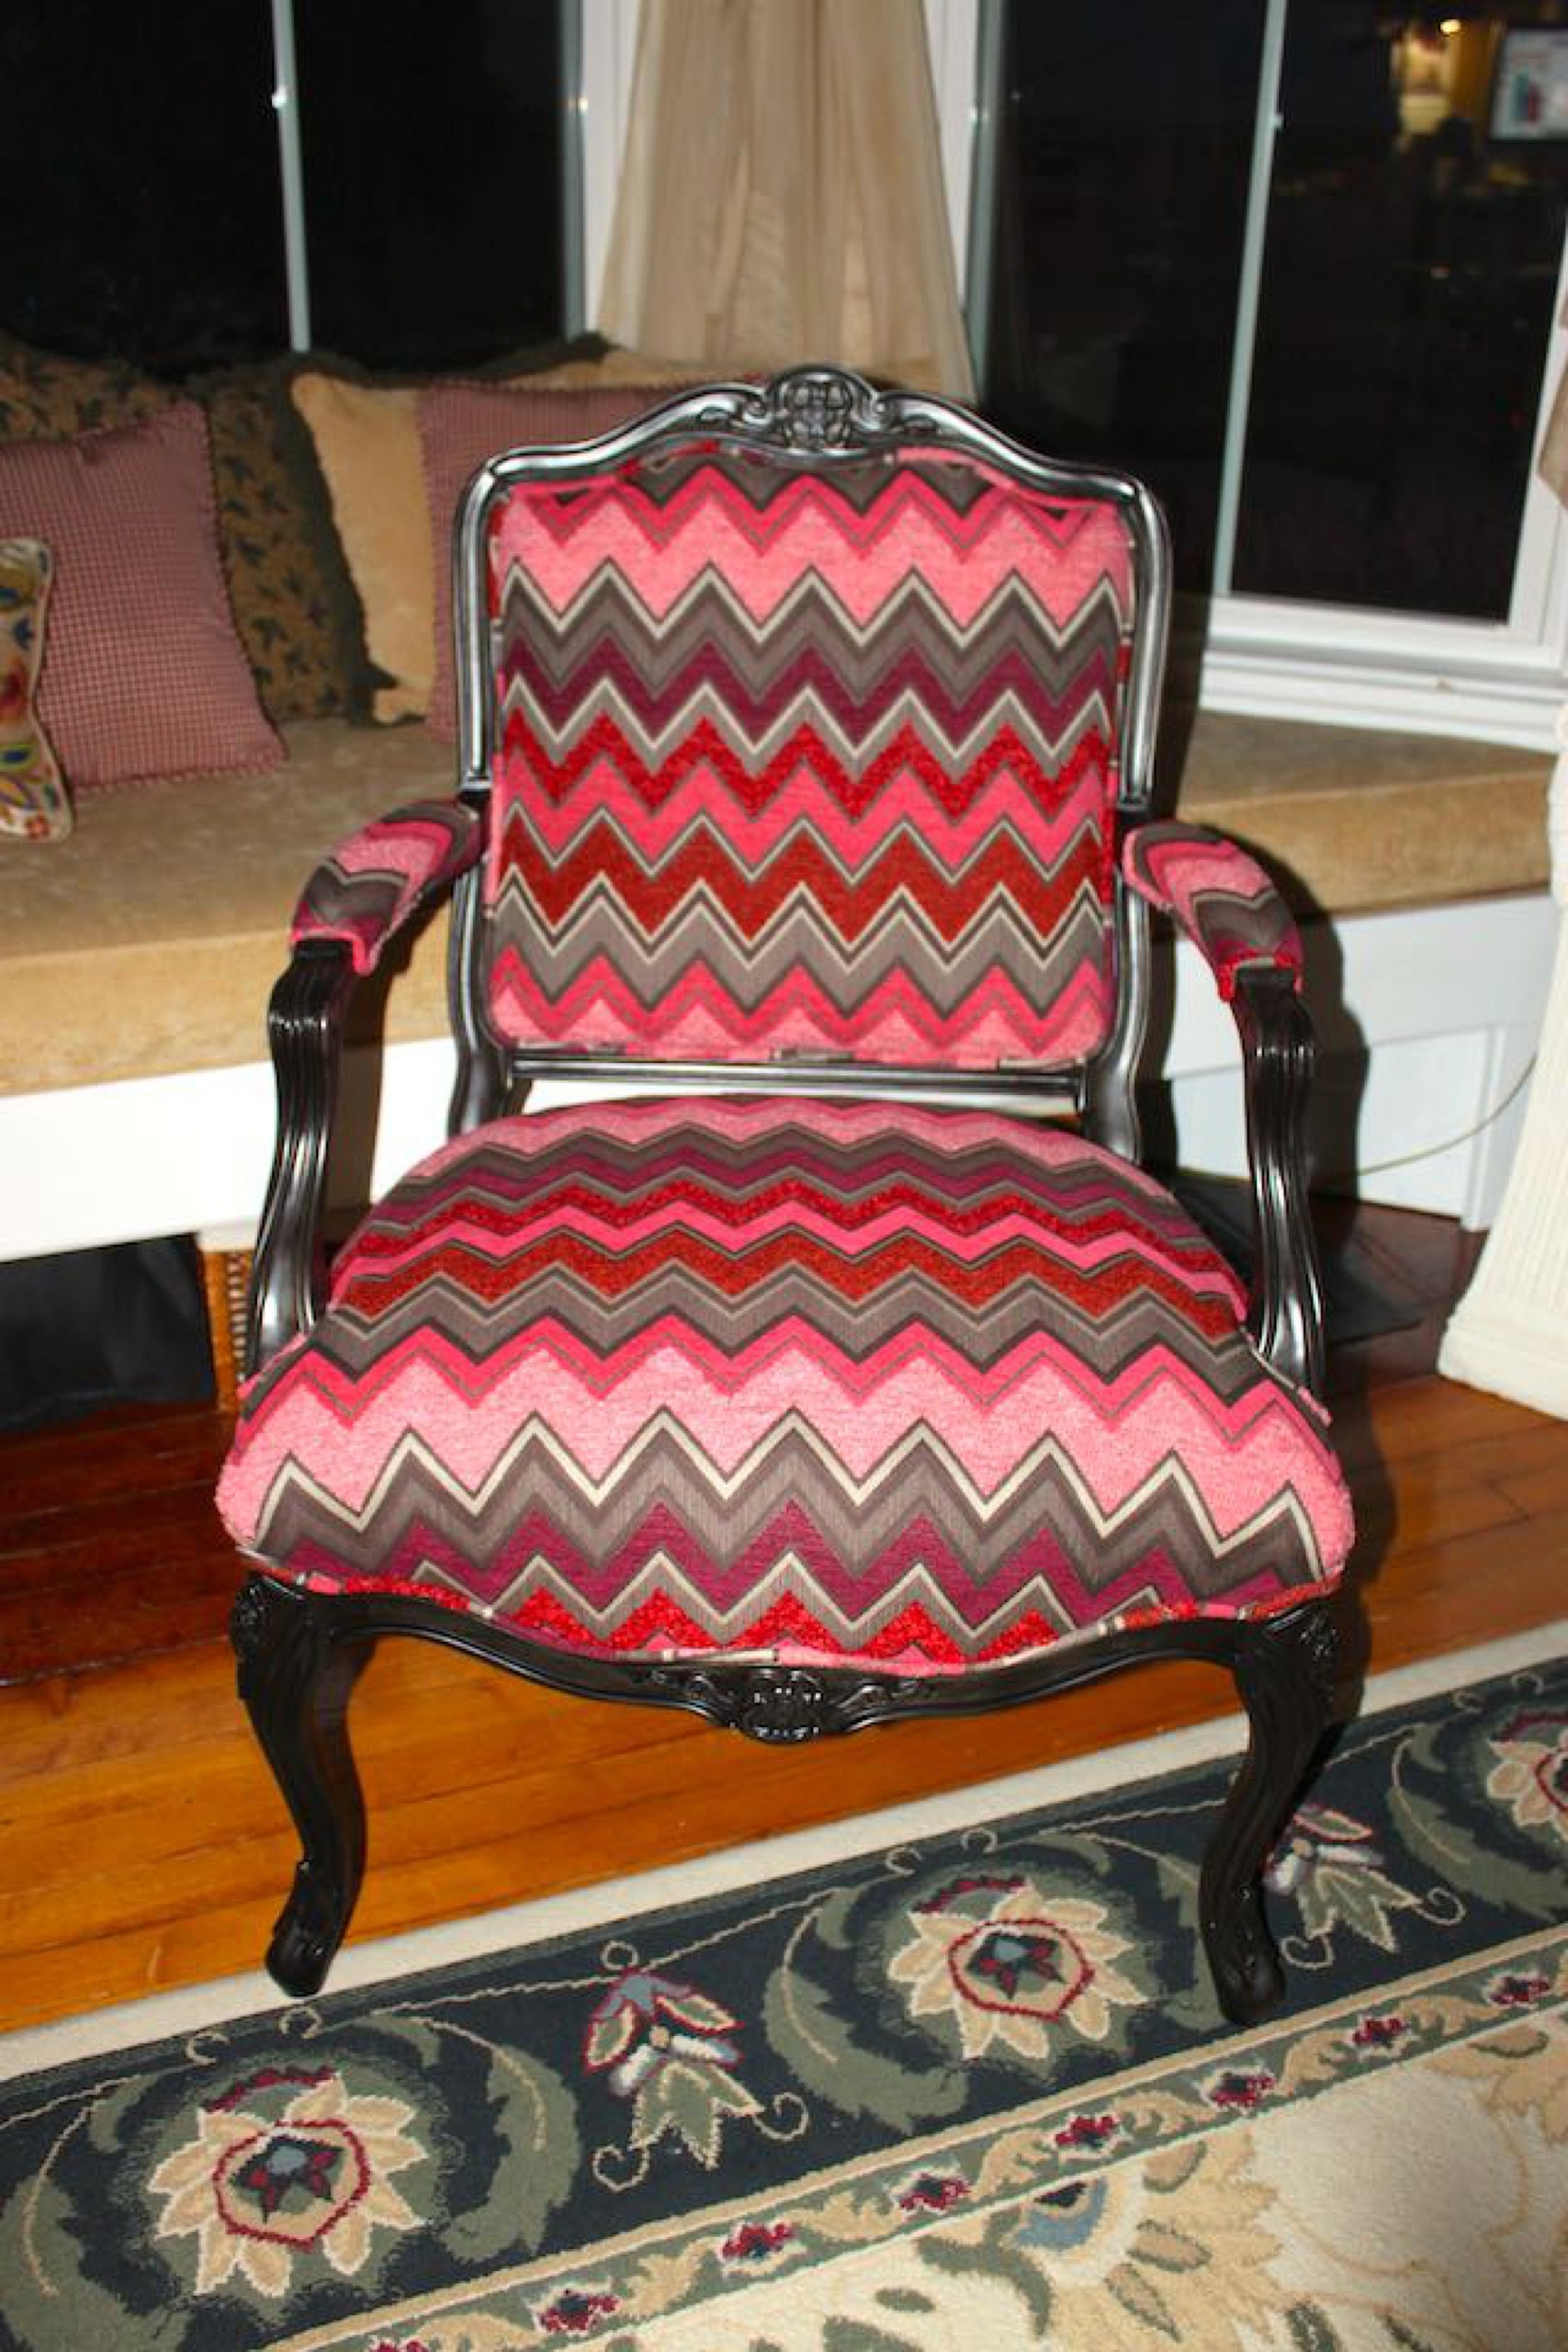 choosing your first upholstery project